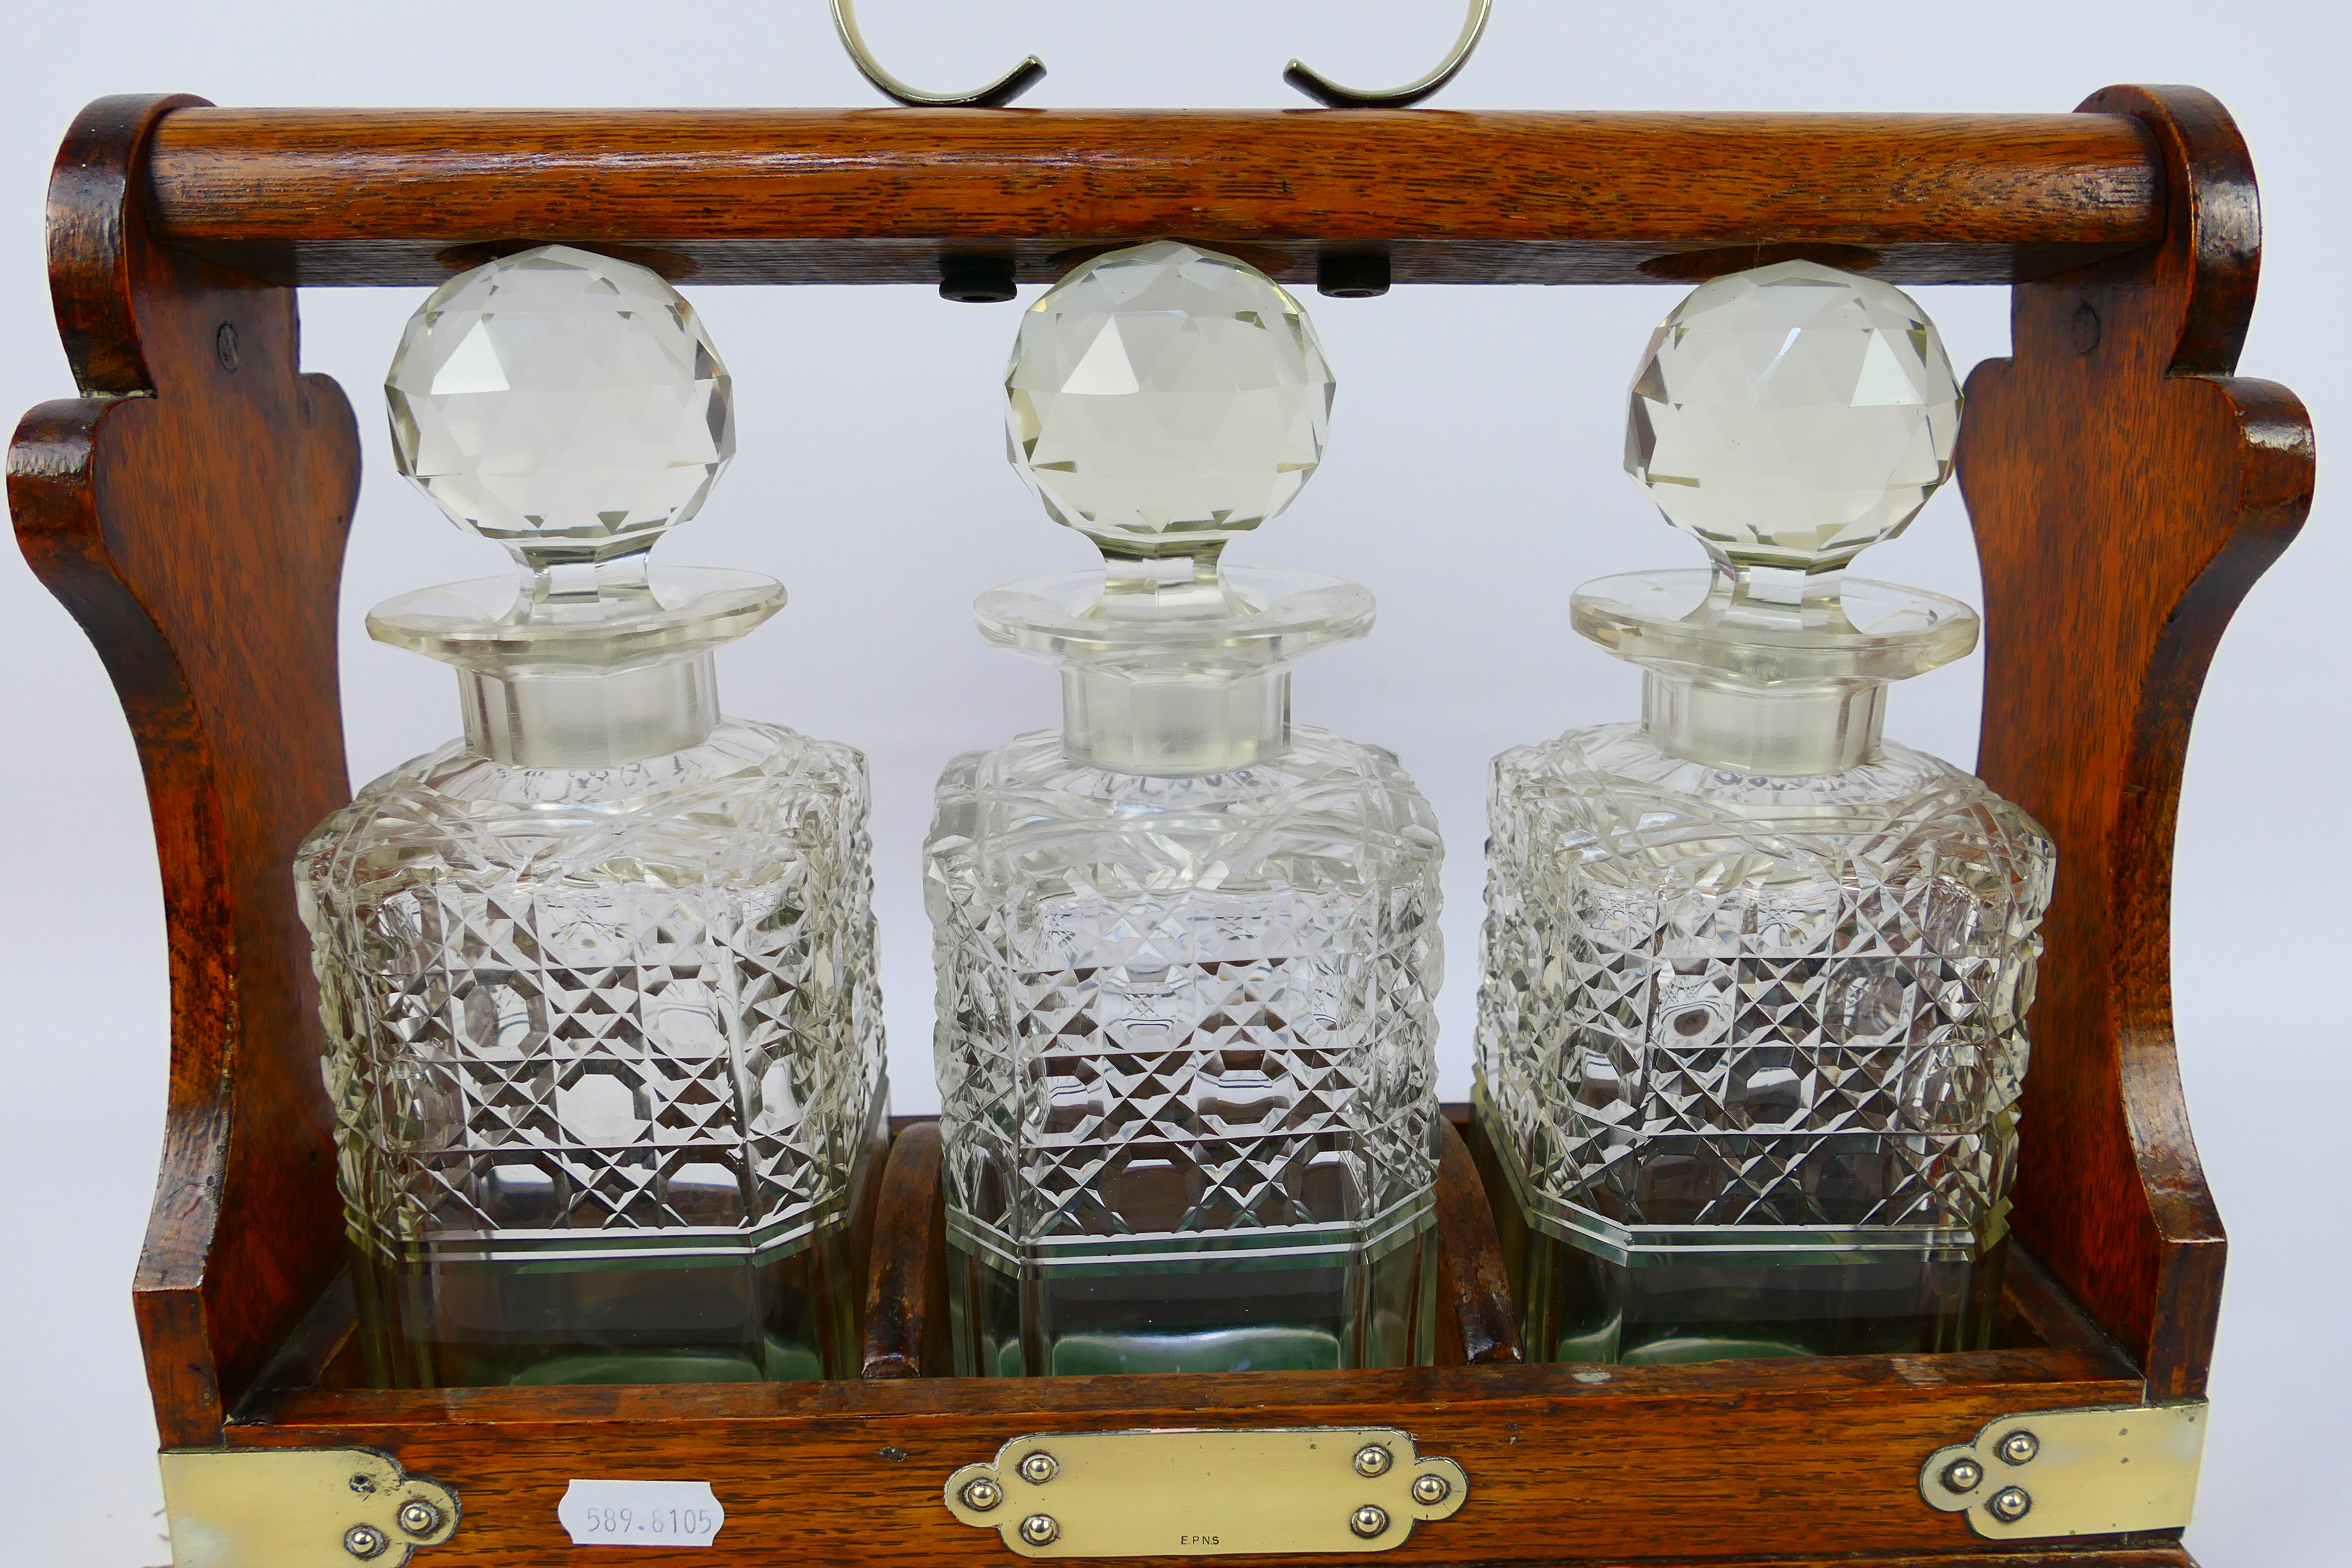 A three decanter oak tantalus with plated mounts, no maker's mark visible. - Image 2 of 6